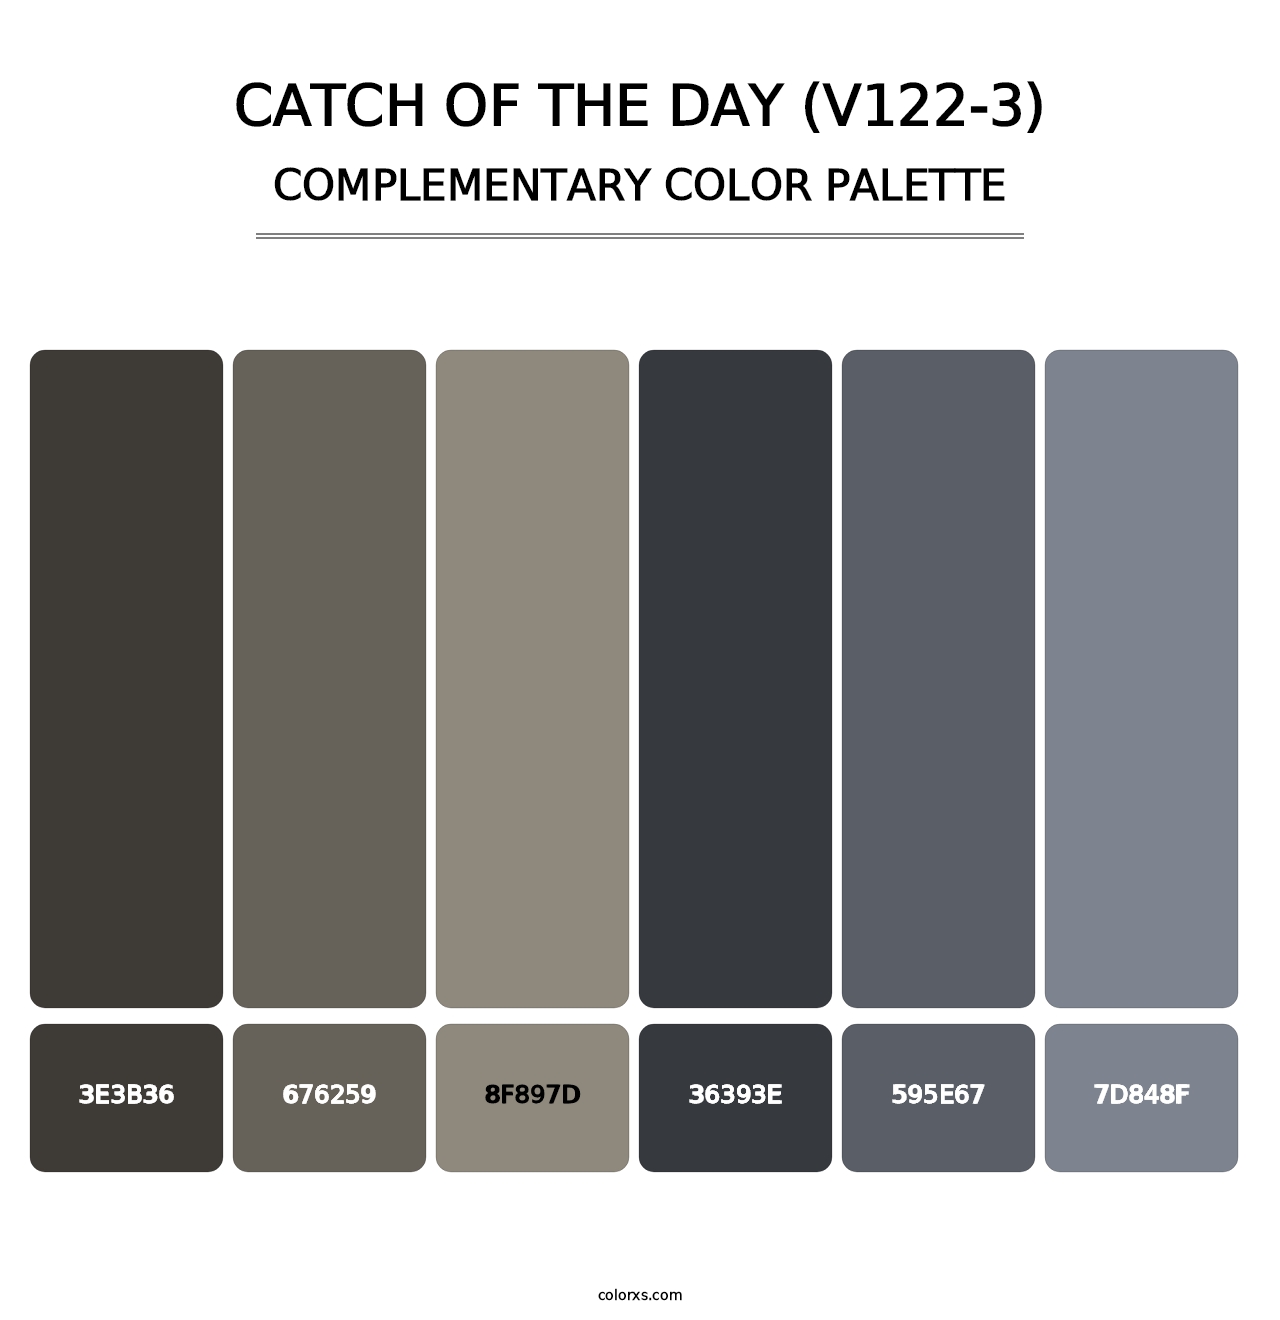 Catch of the Day (V122-3) - Complementary Color Palette